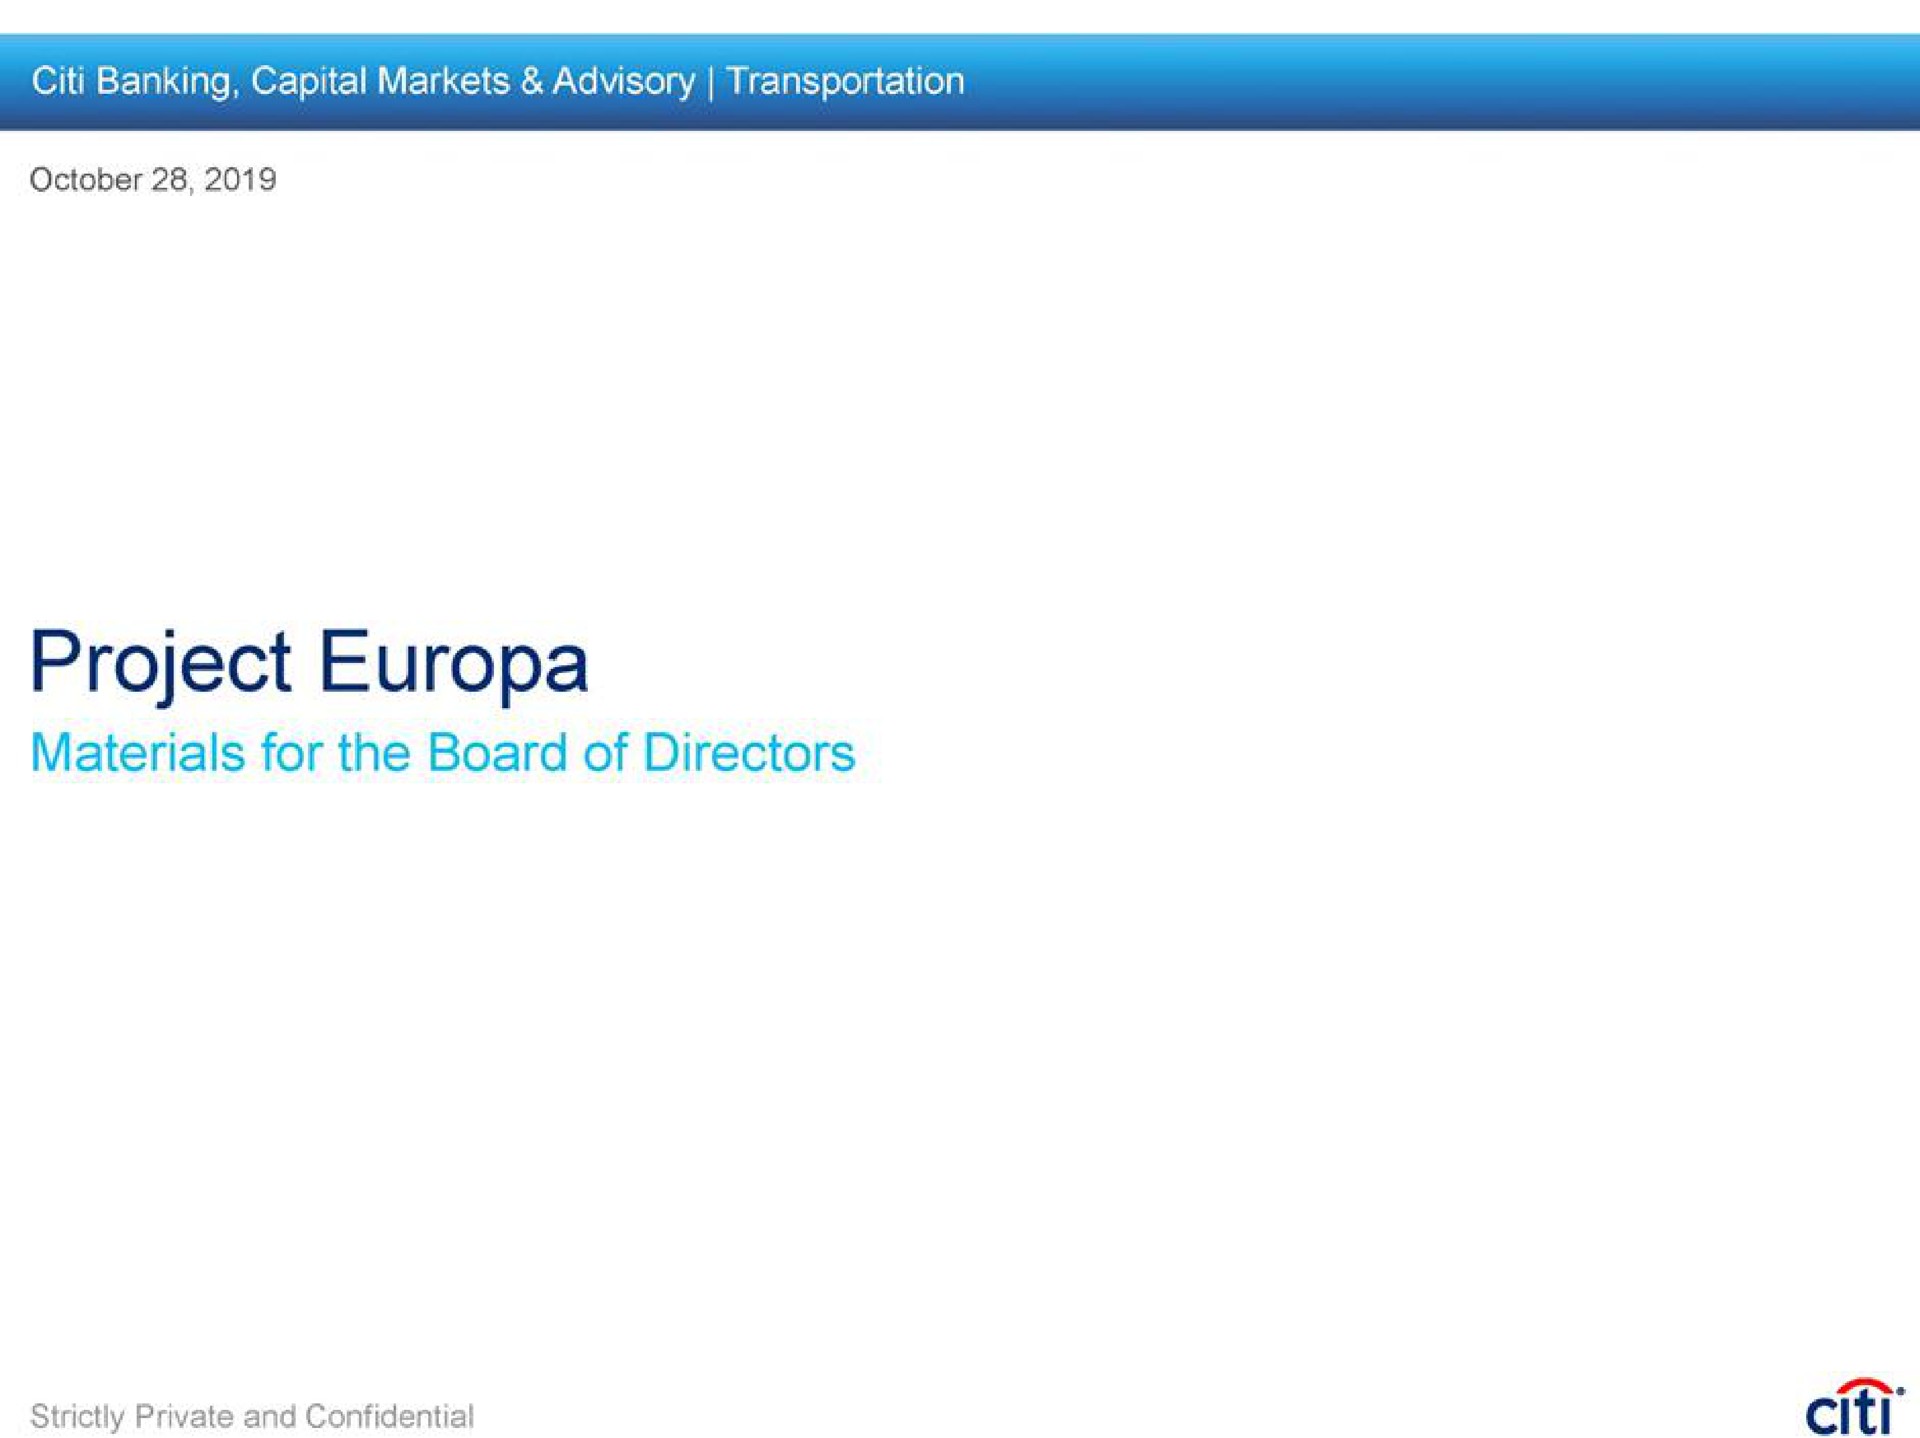 banking capital markets advisory transportation project materials for the board of directors | Citi